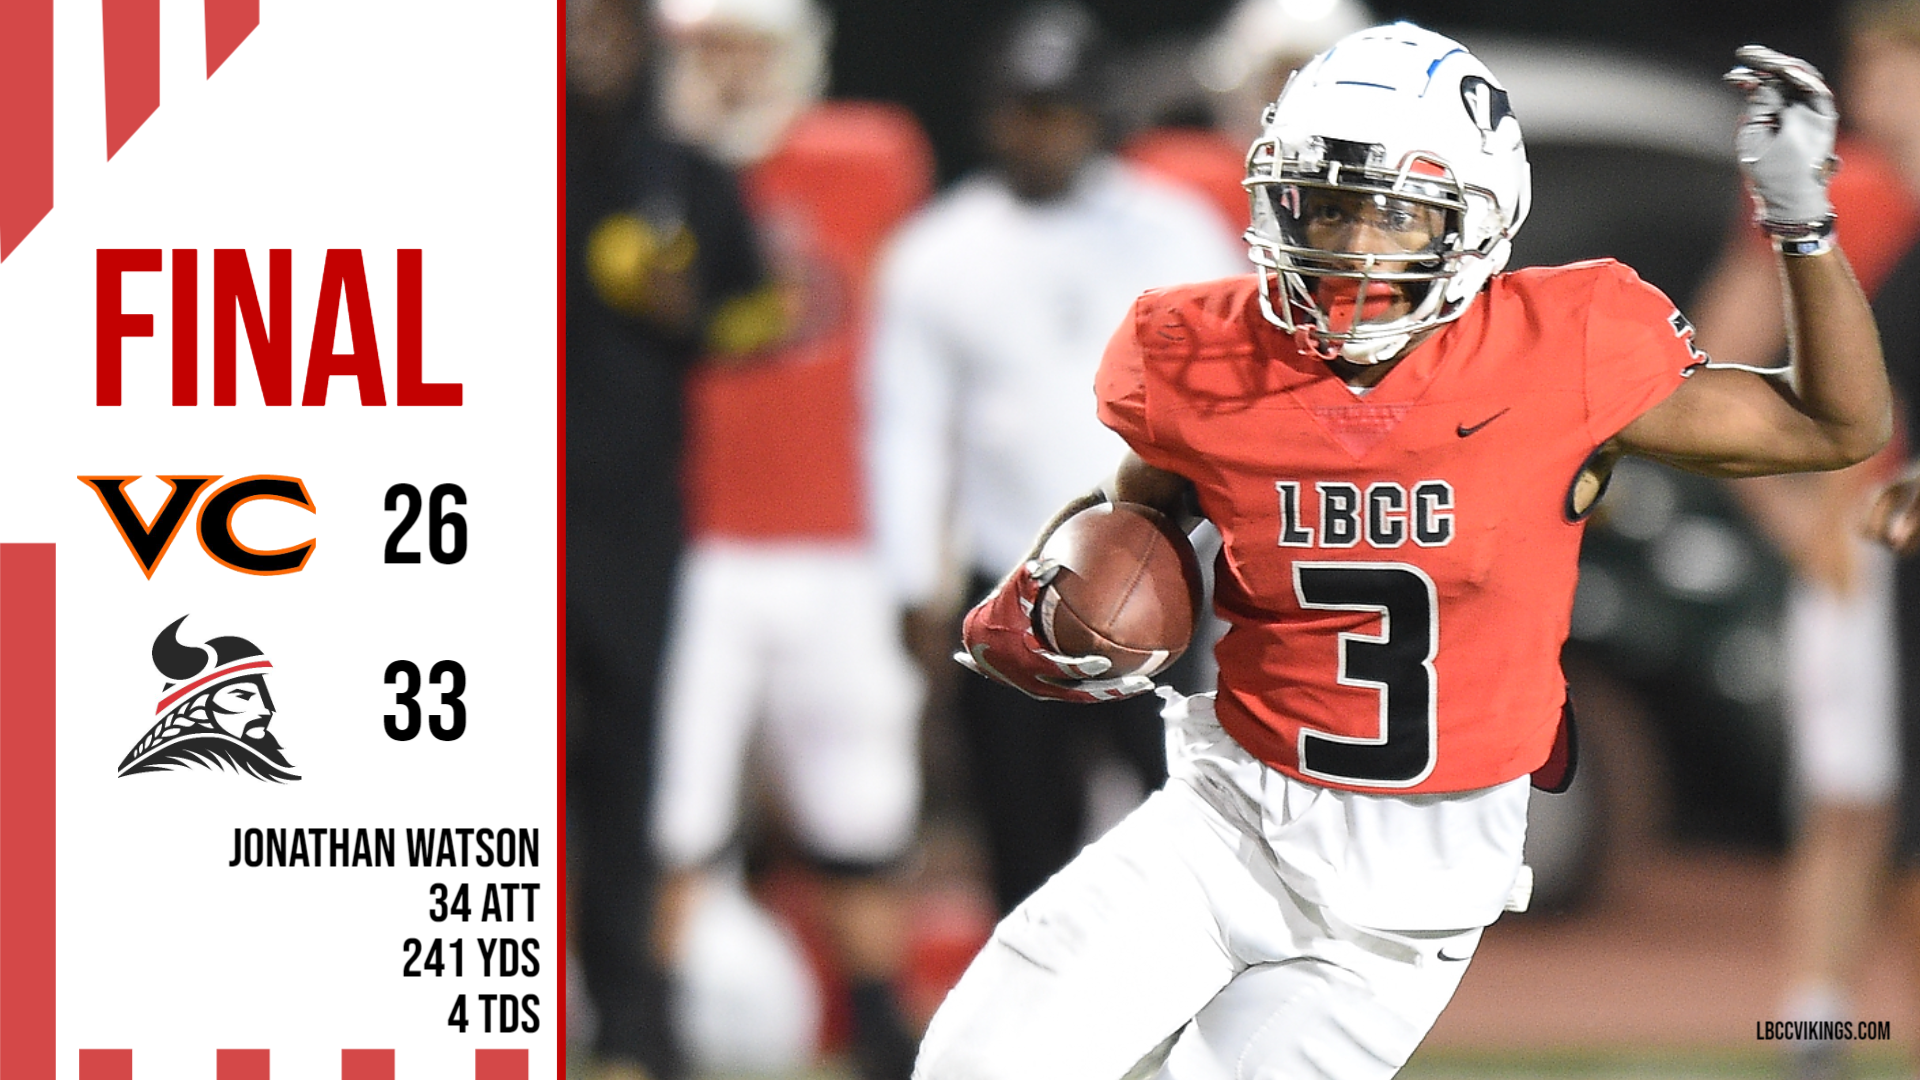 Watson 241 yards, 4 TDs leads LBCC to 33-26 win over Ventura